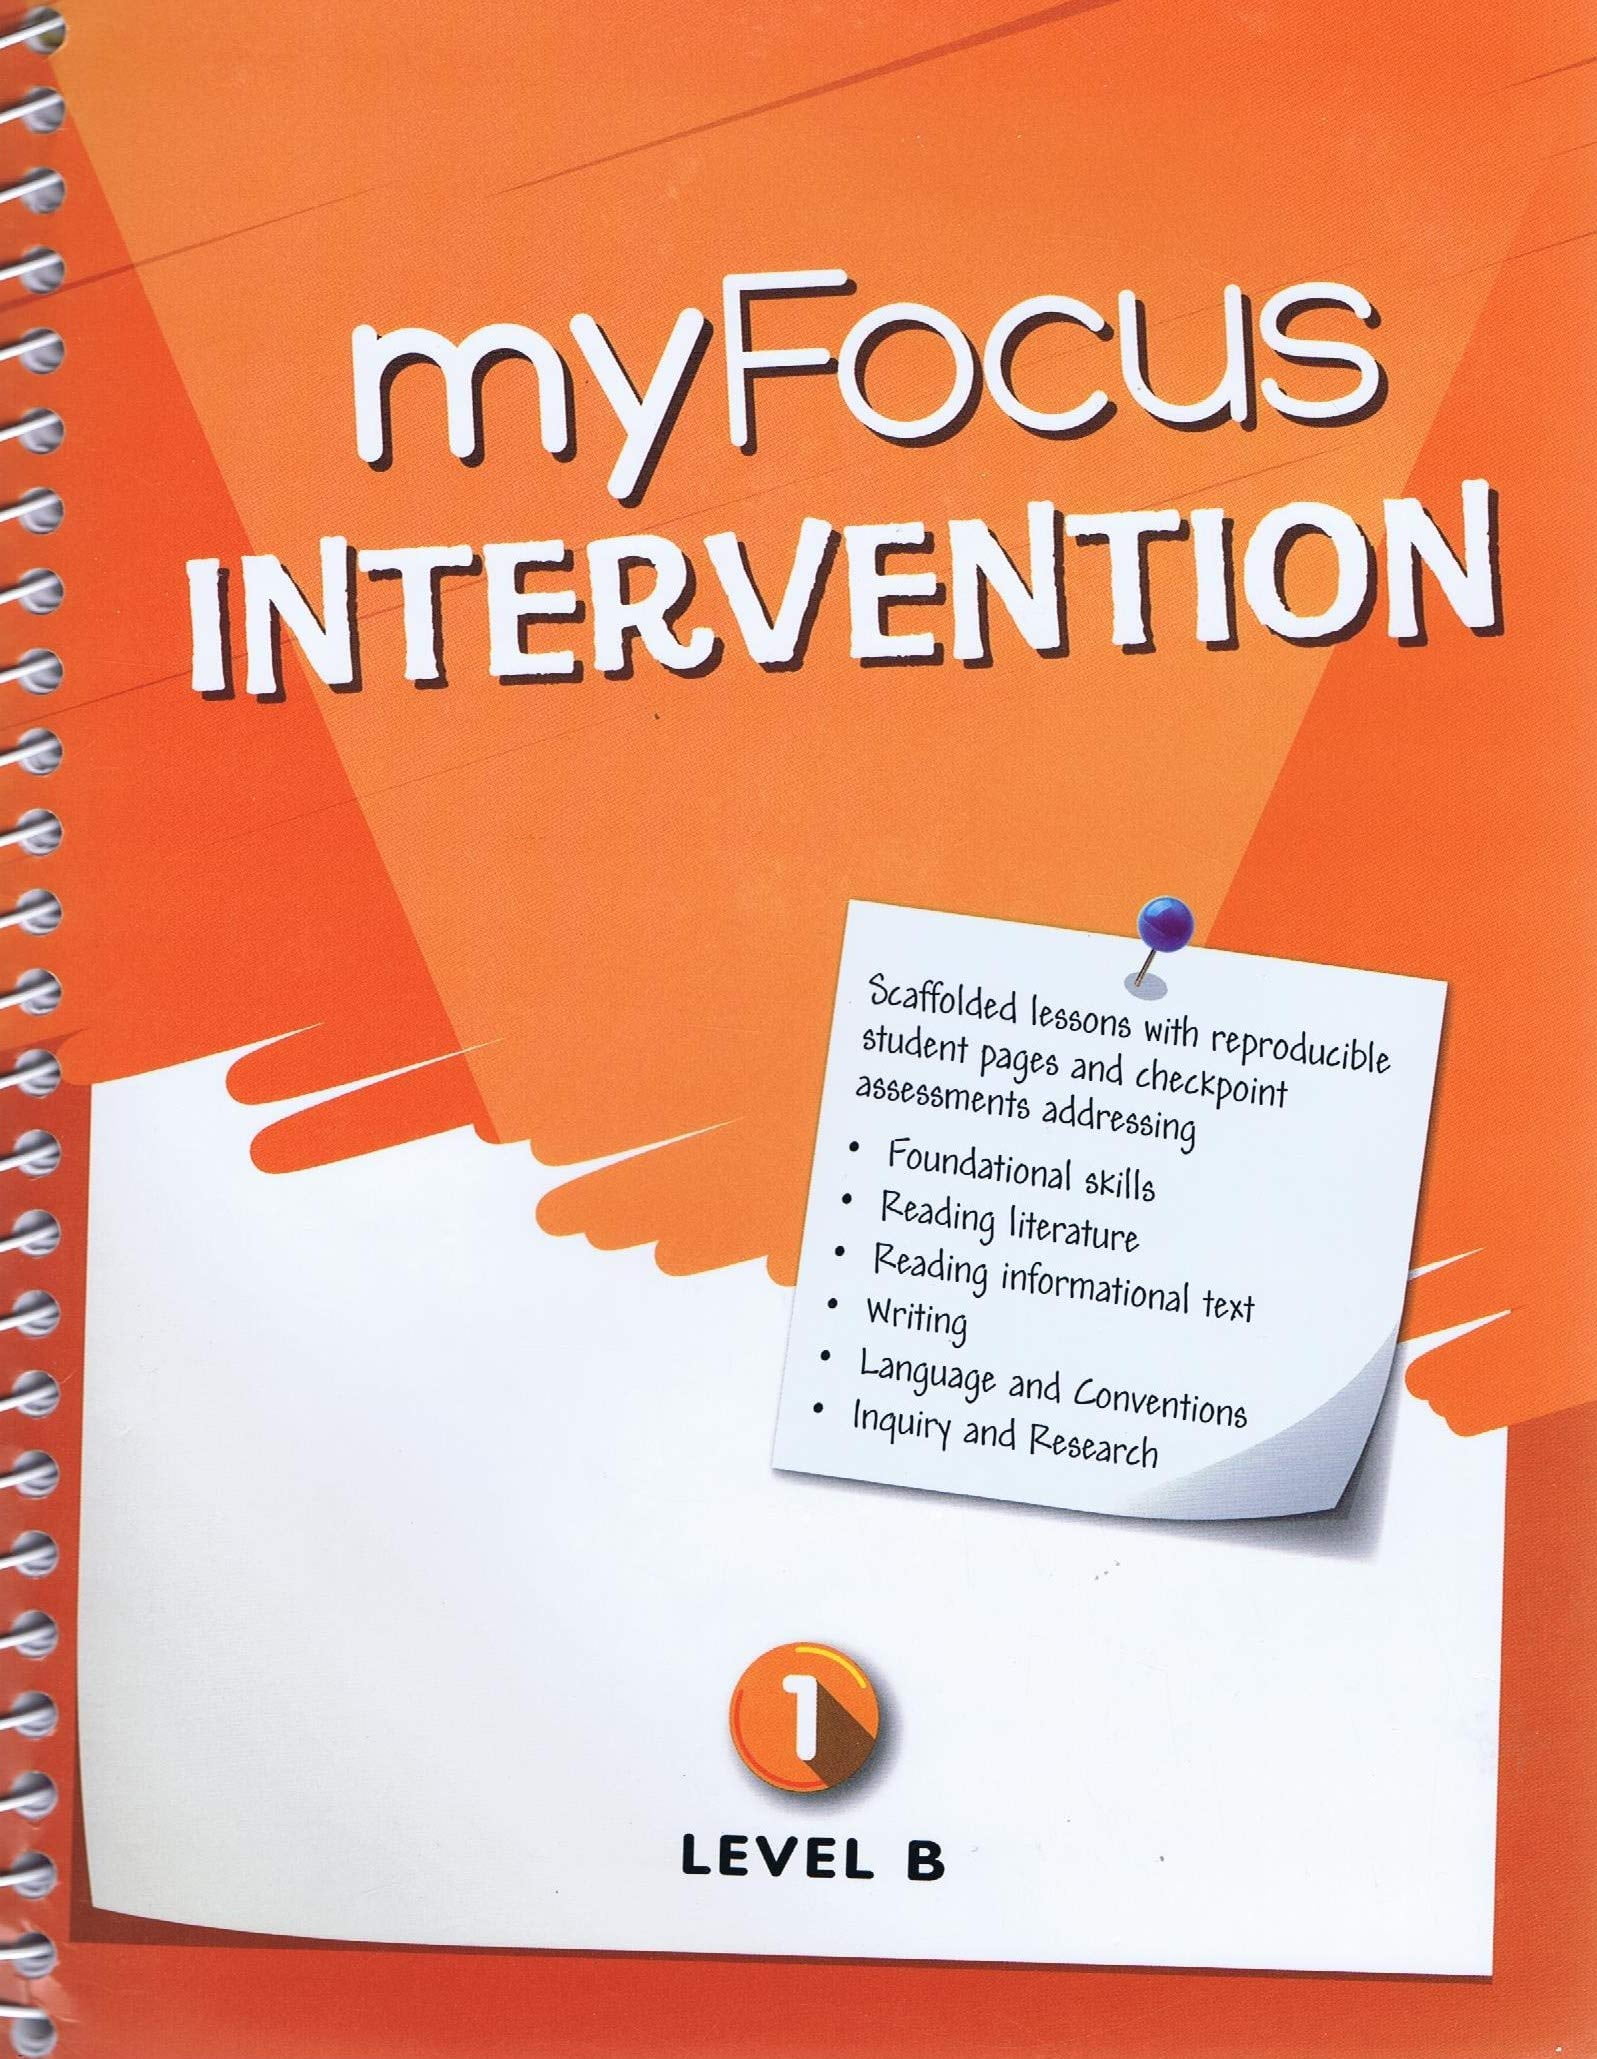 0328993913　9780328993918　myFocus　Level　Intervention　Guide　Teacher's　B　Used/Very　Good